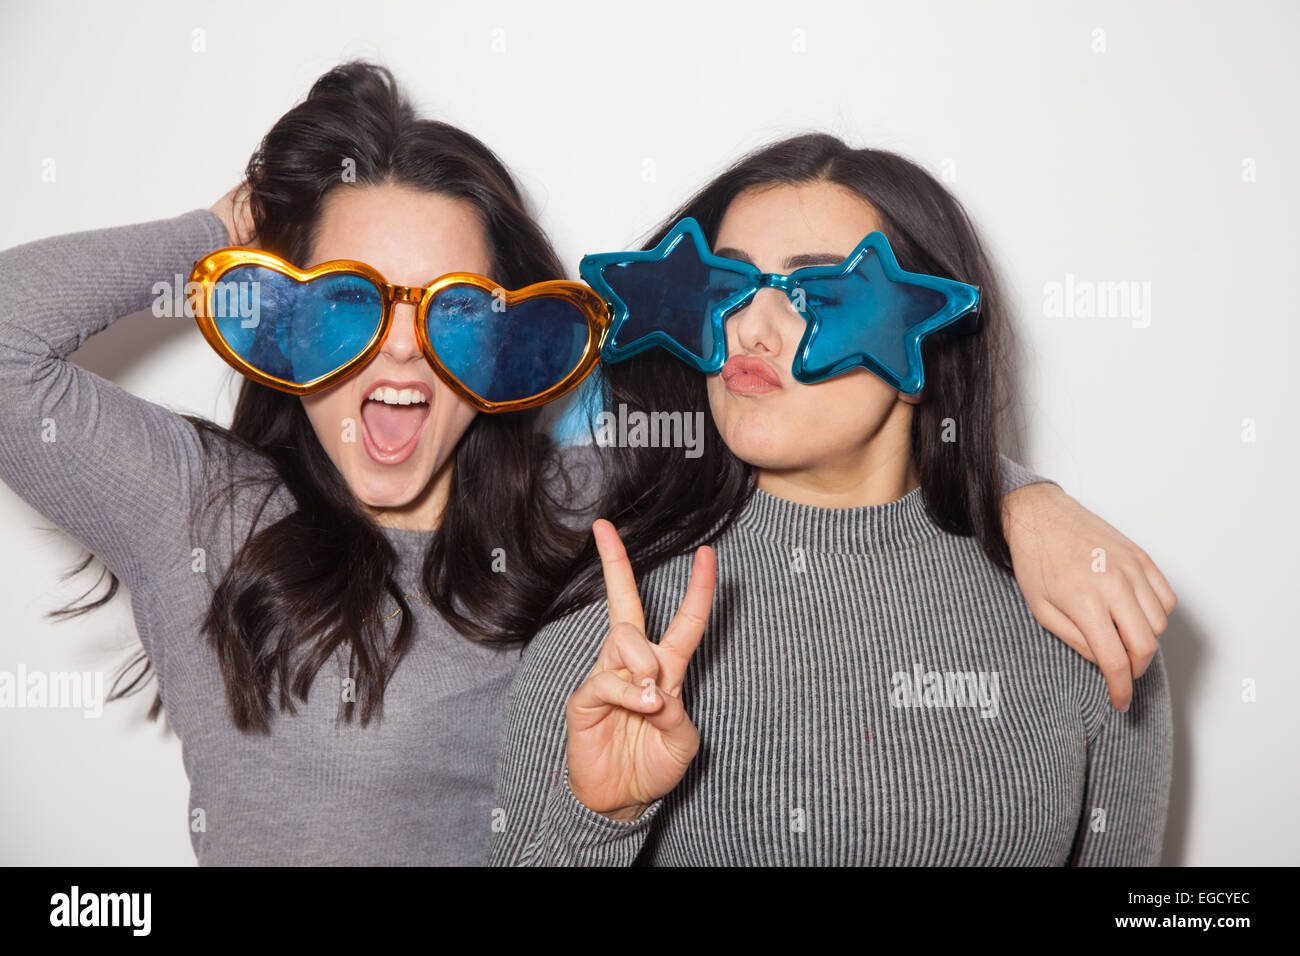 Two sisters having fun together wearing comedy oversize glasses. Stock Photo